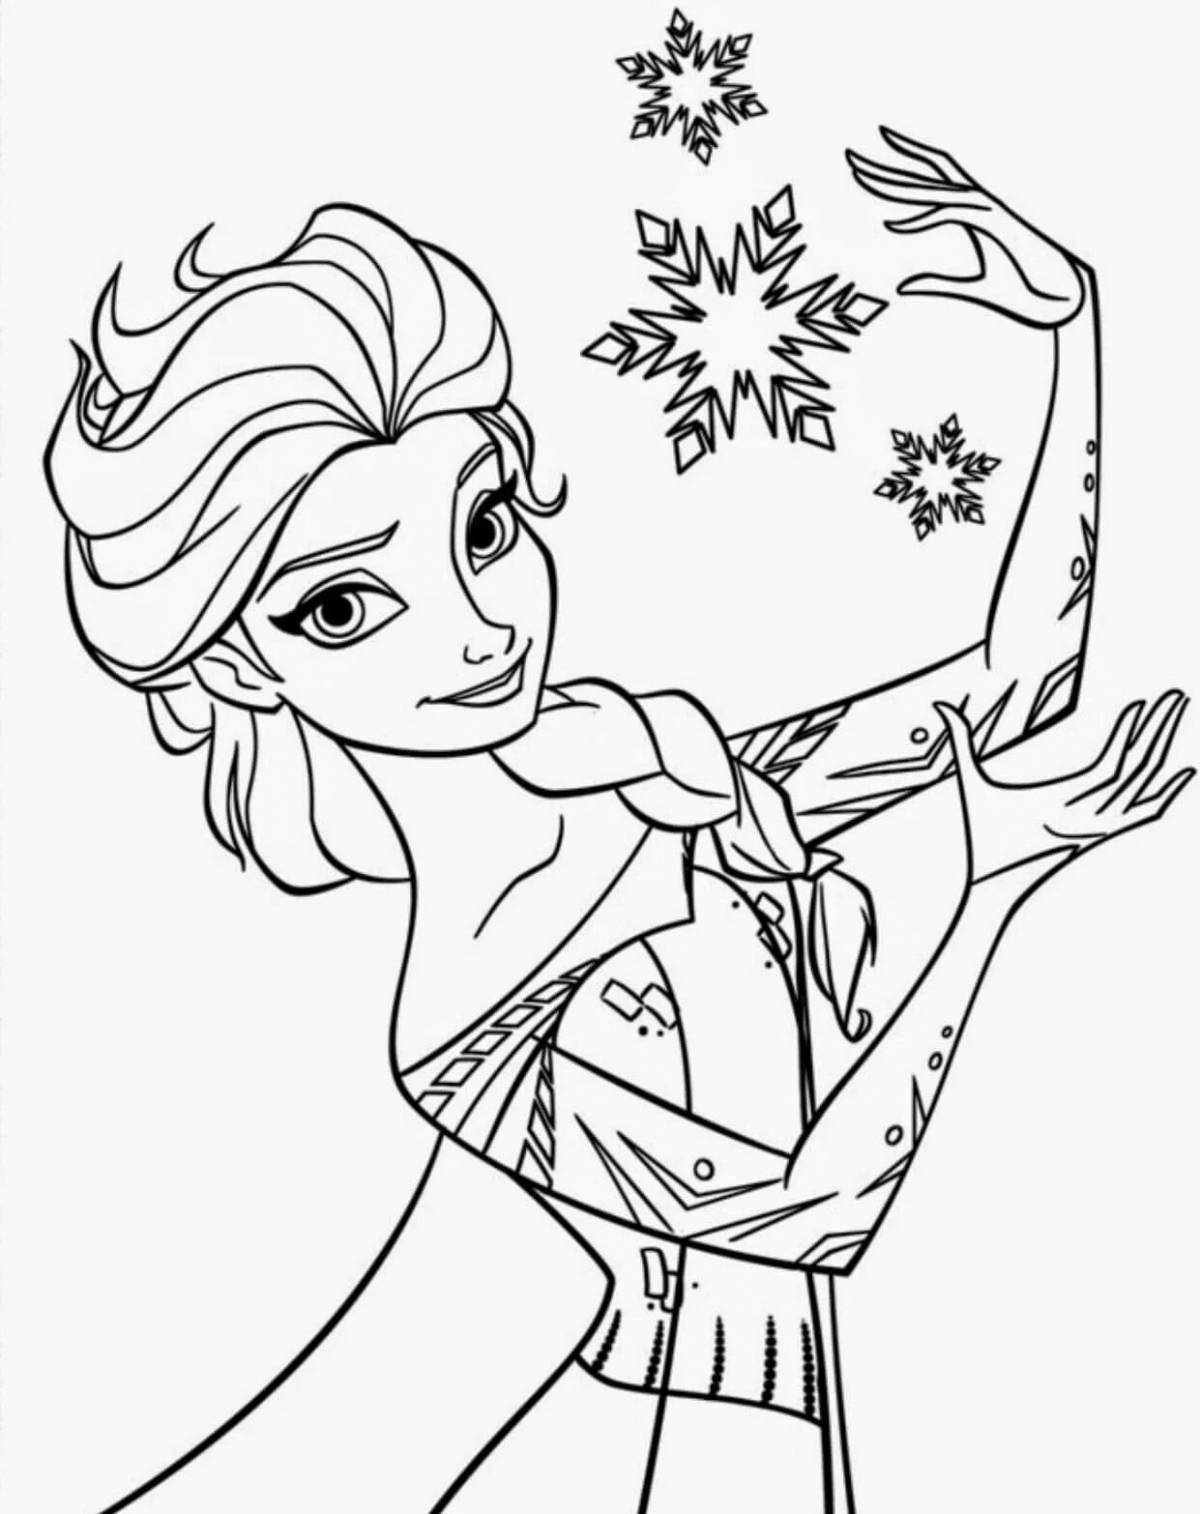 Adorable cartoon coloring book for girls 6-7 years old